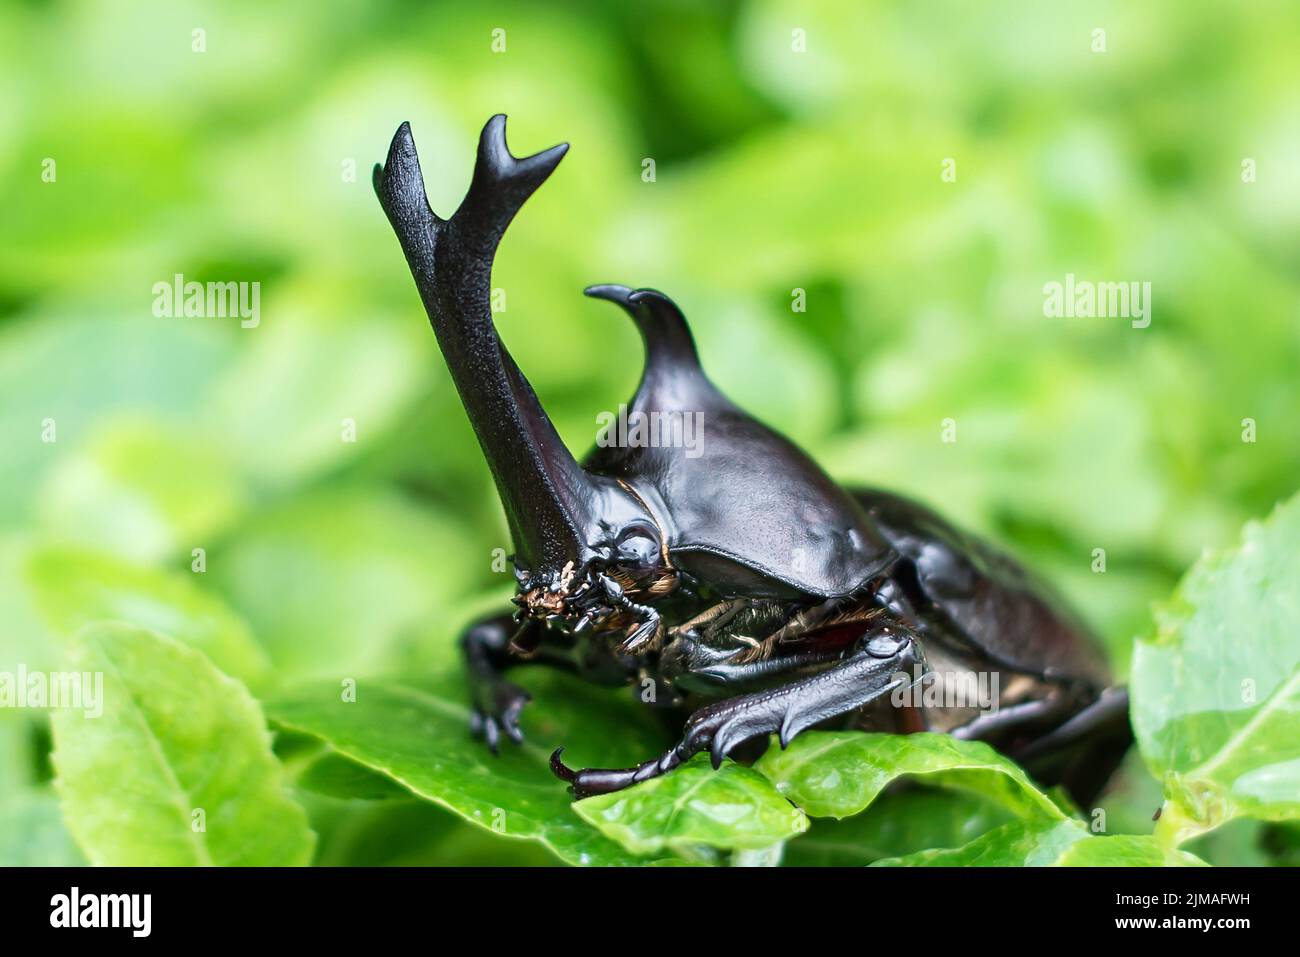 The beautiful dynastic beetle , male , perched on leaf. Selective focus. Leaves background Stock Photo